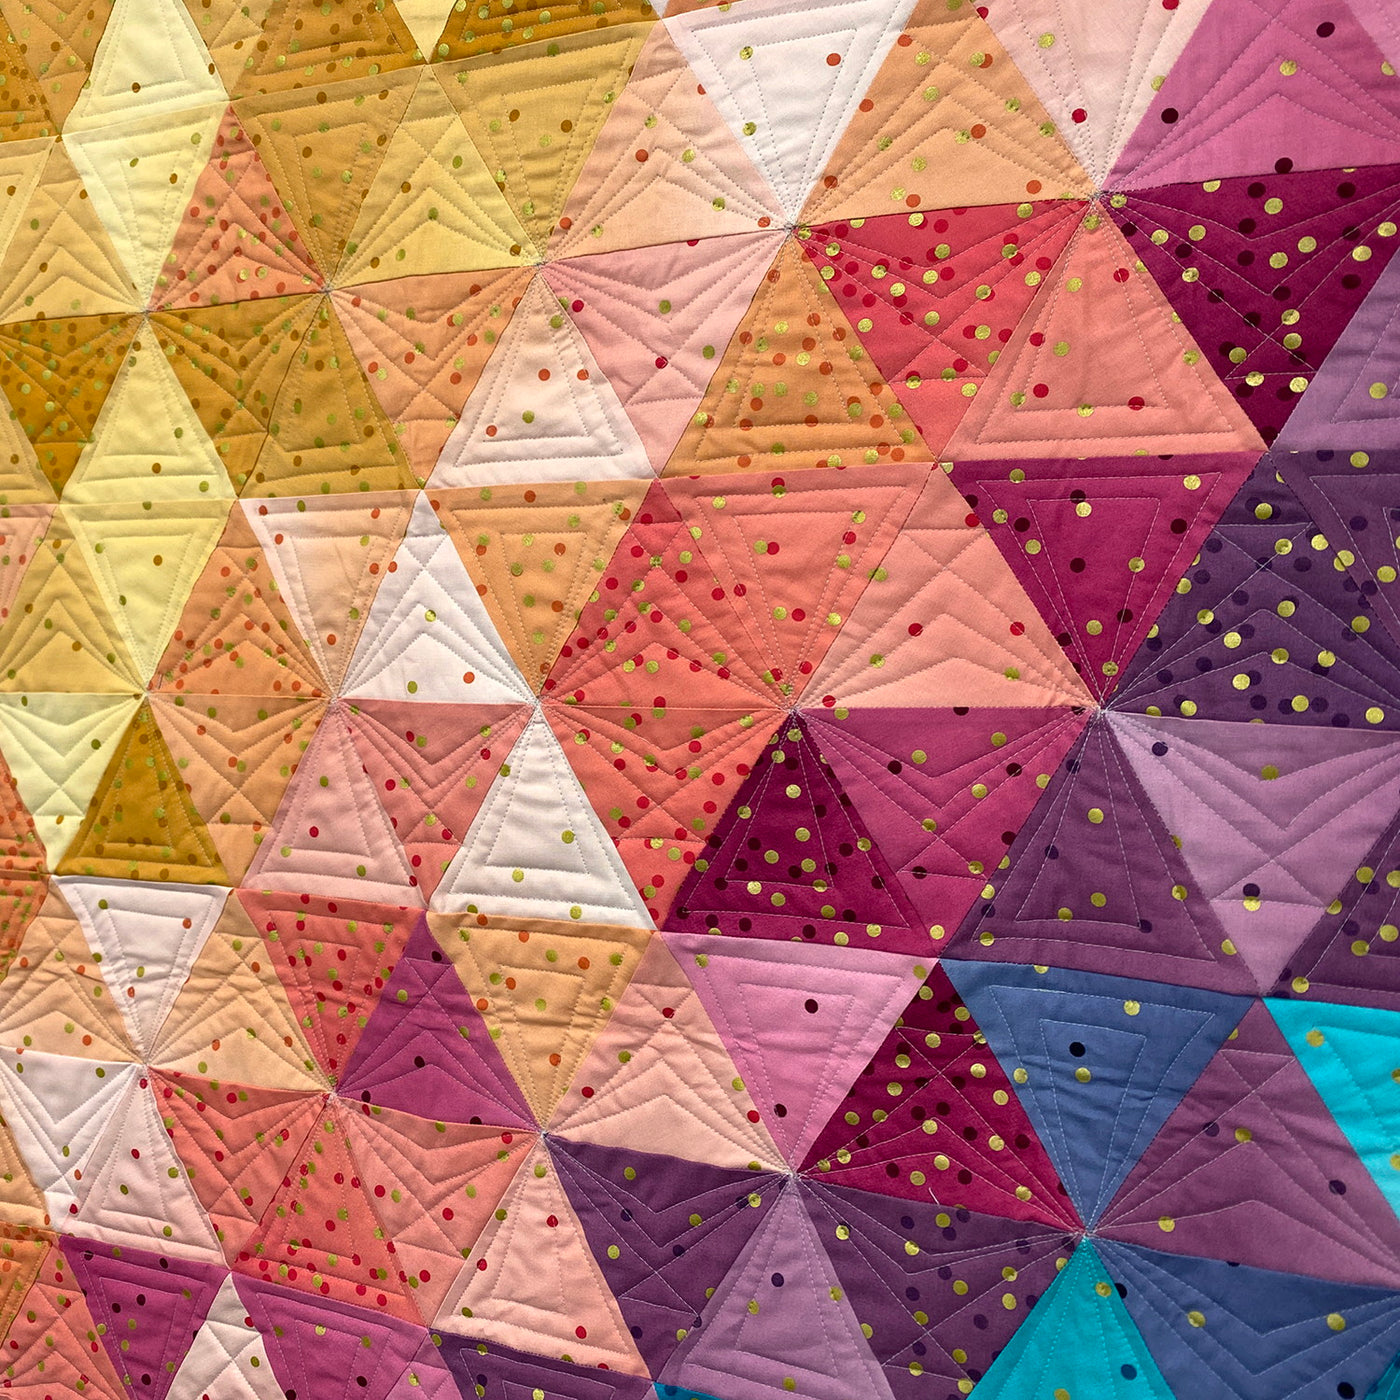 Ombre' Triangles Pattern  **pattern has been reordered**